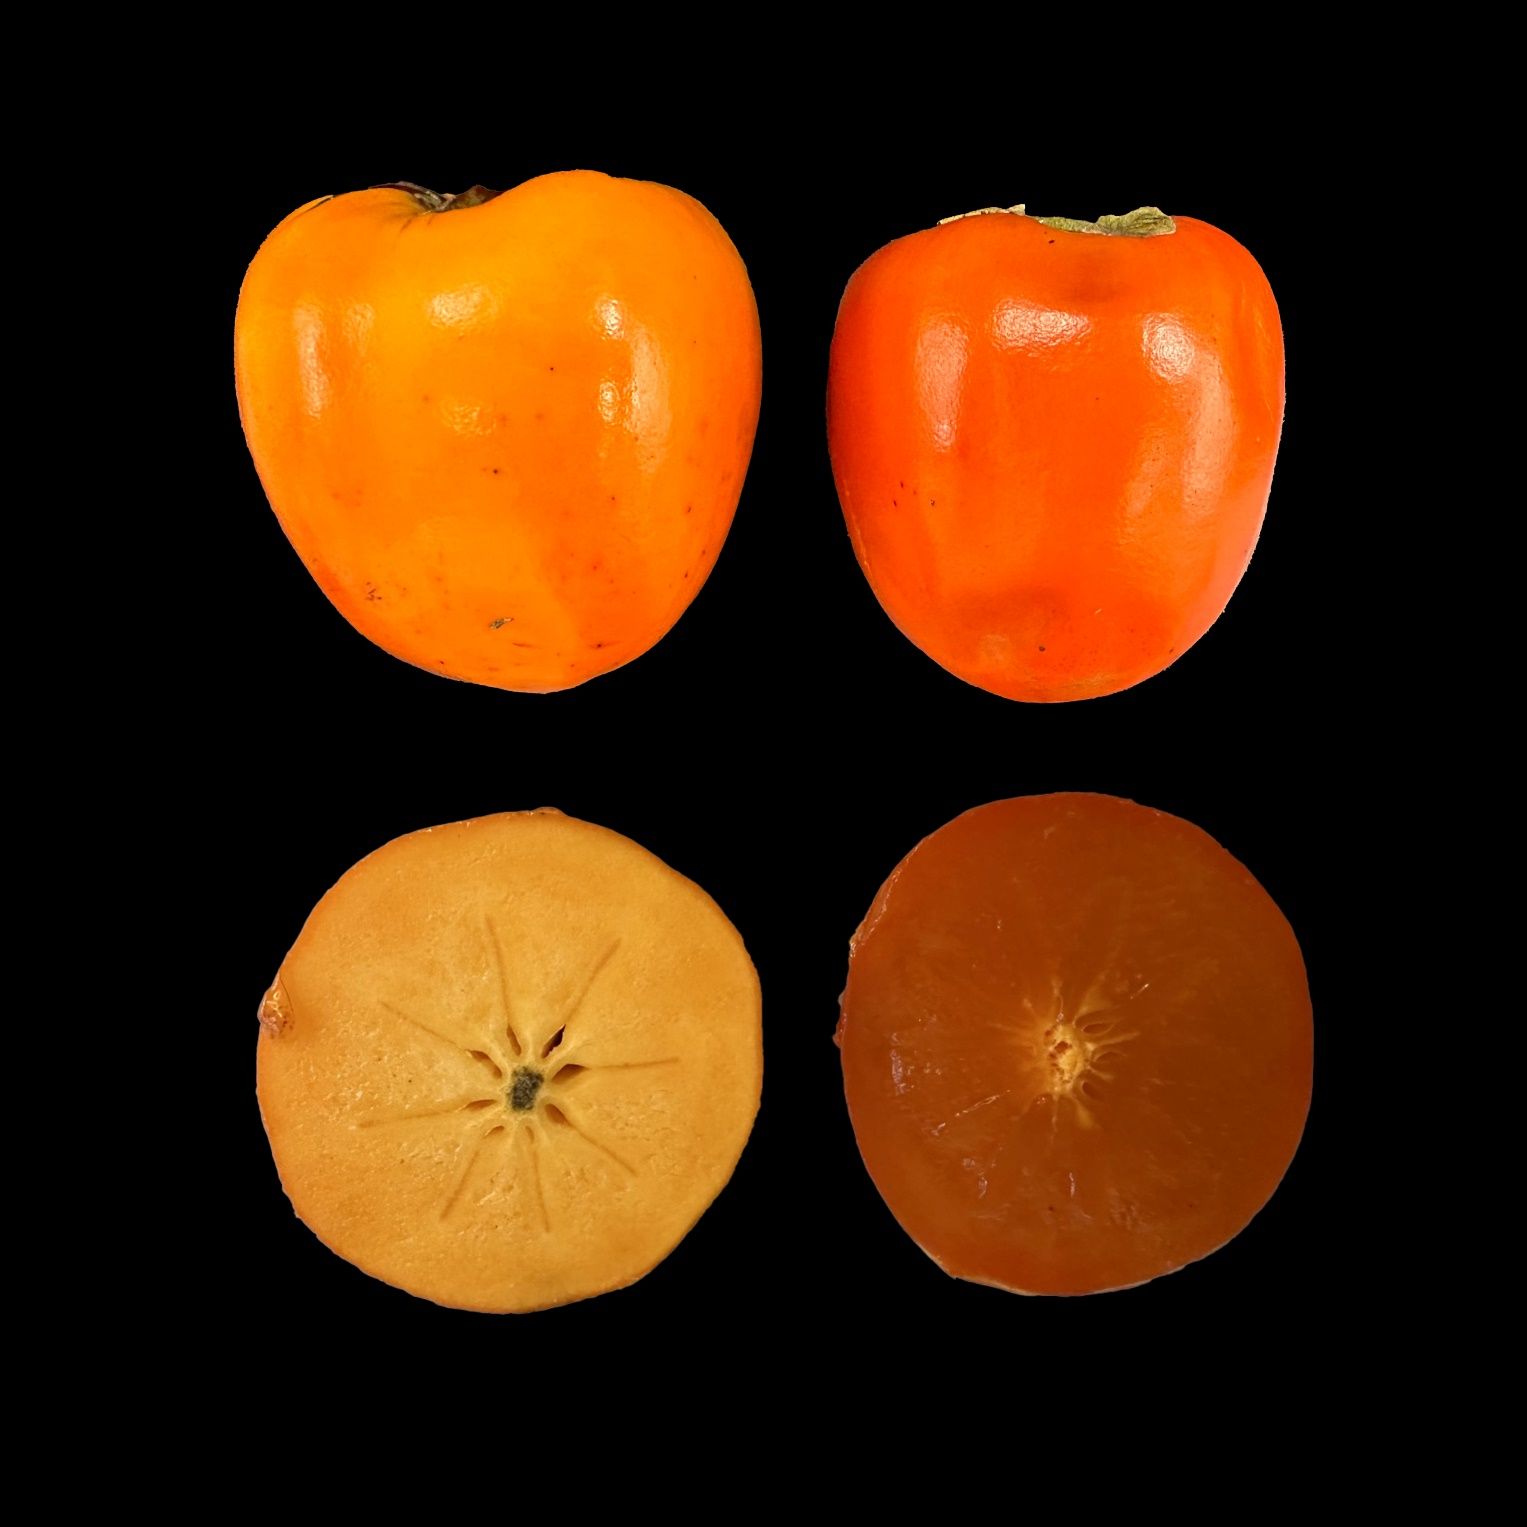 Intact (top) and cross section (bottom) of astringent ‘Hachiya’ fruit before softening (left) and after softening (right). The fruit become non-astringent and edible only when fully soft as shown.